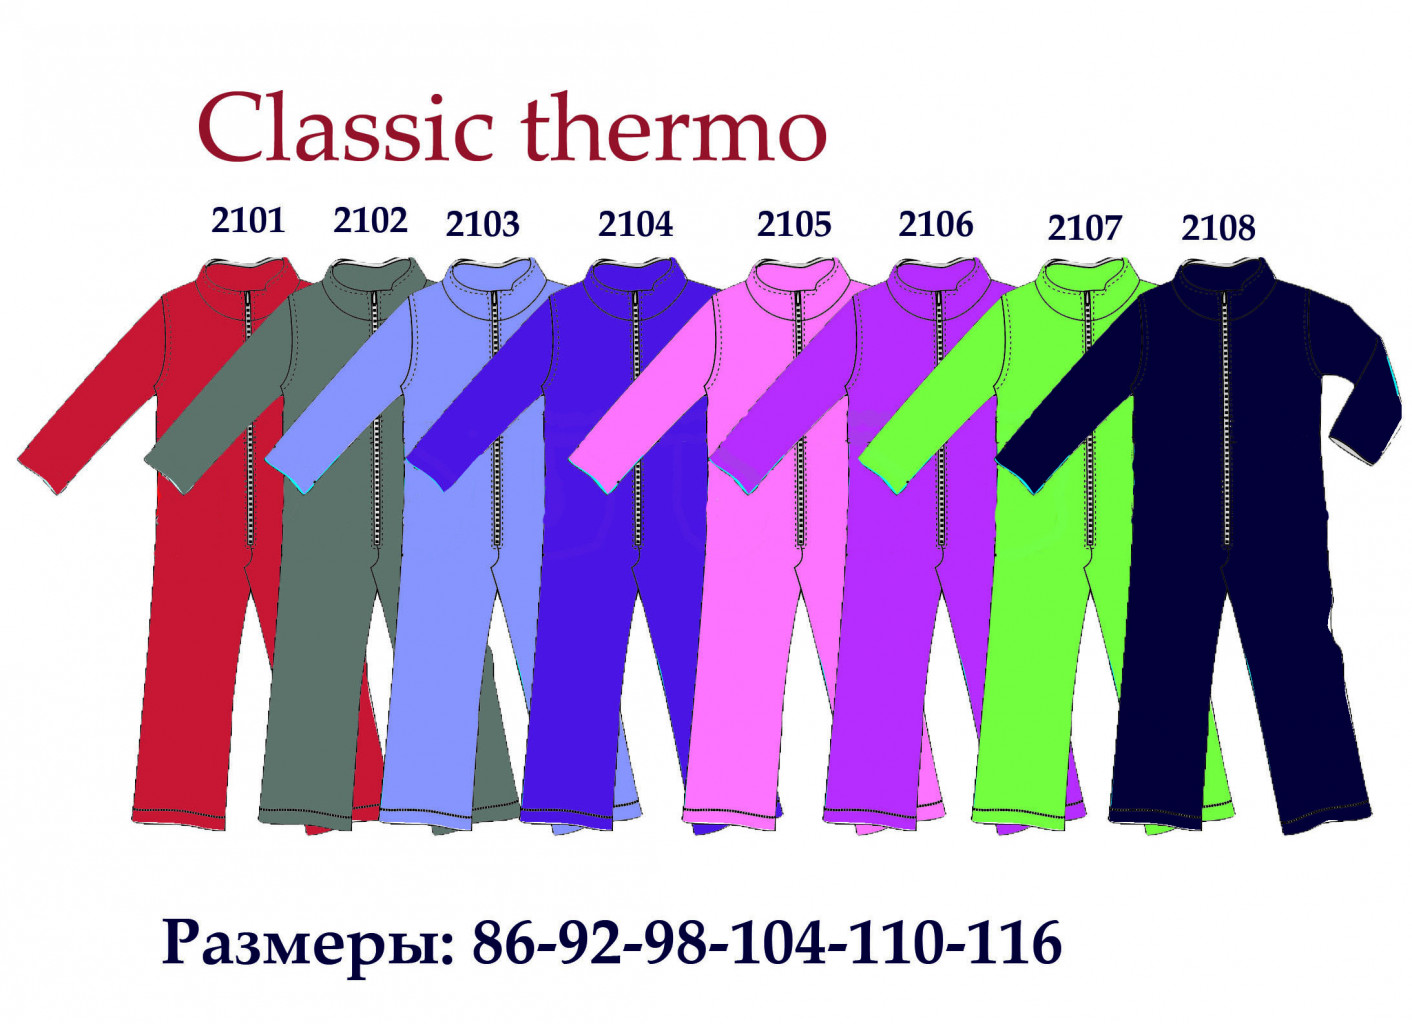 classic thermo2.jpg